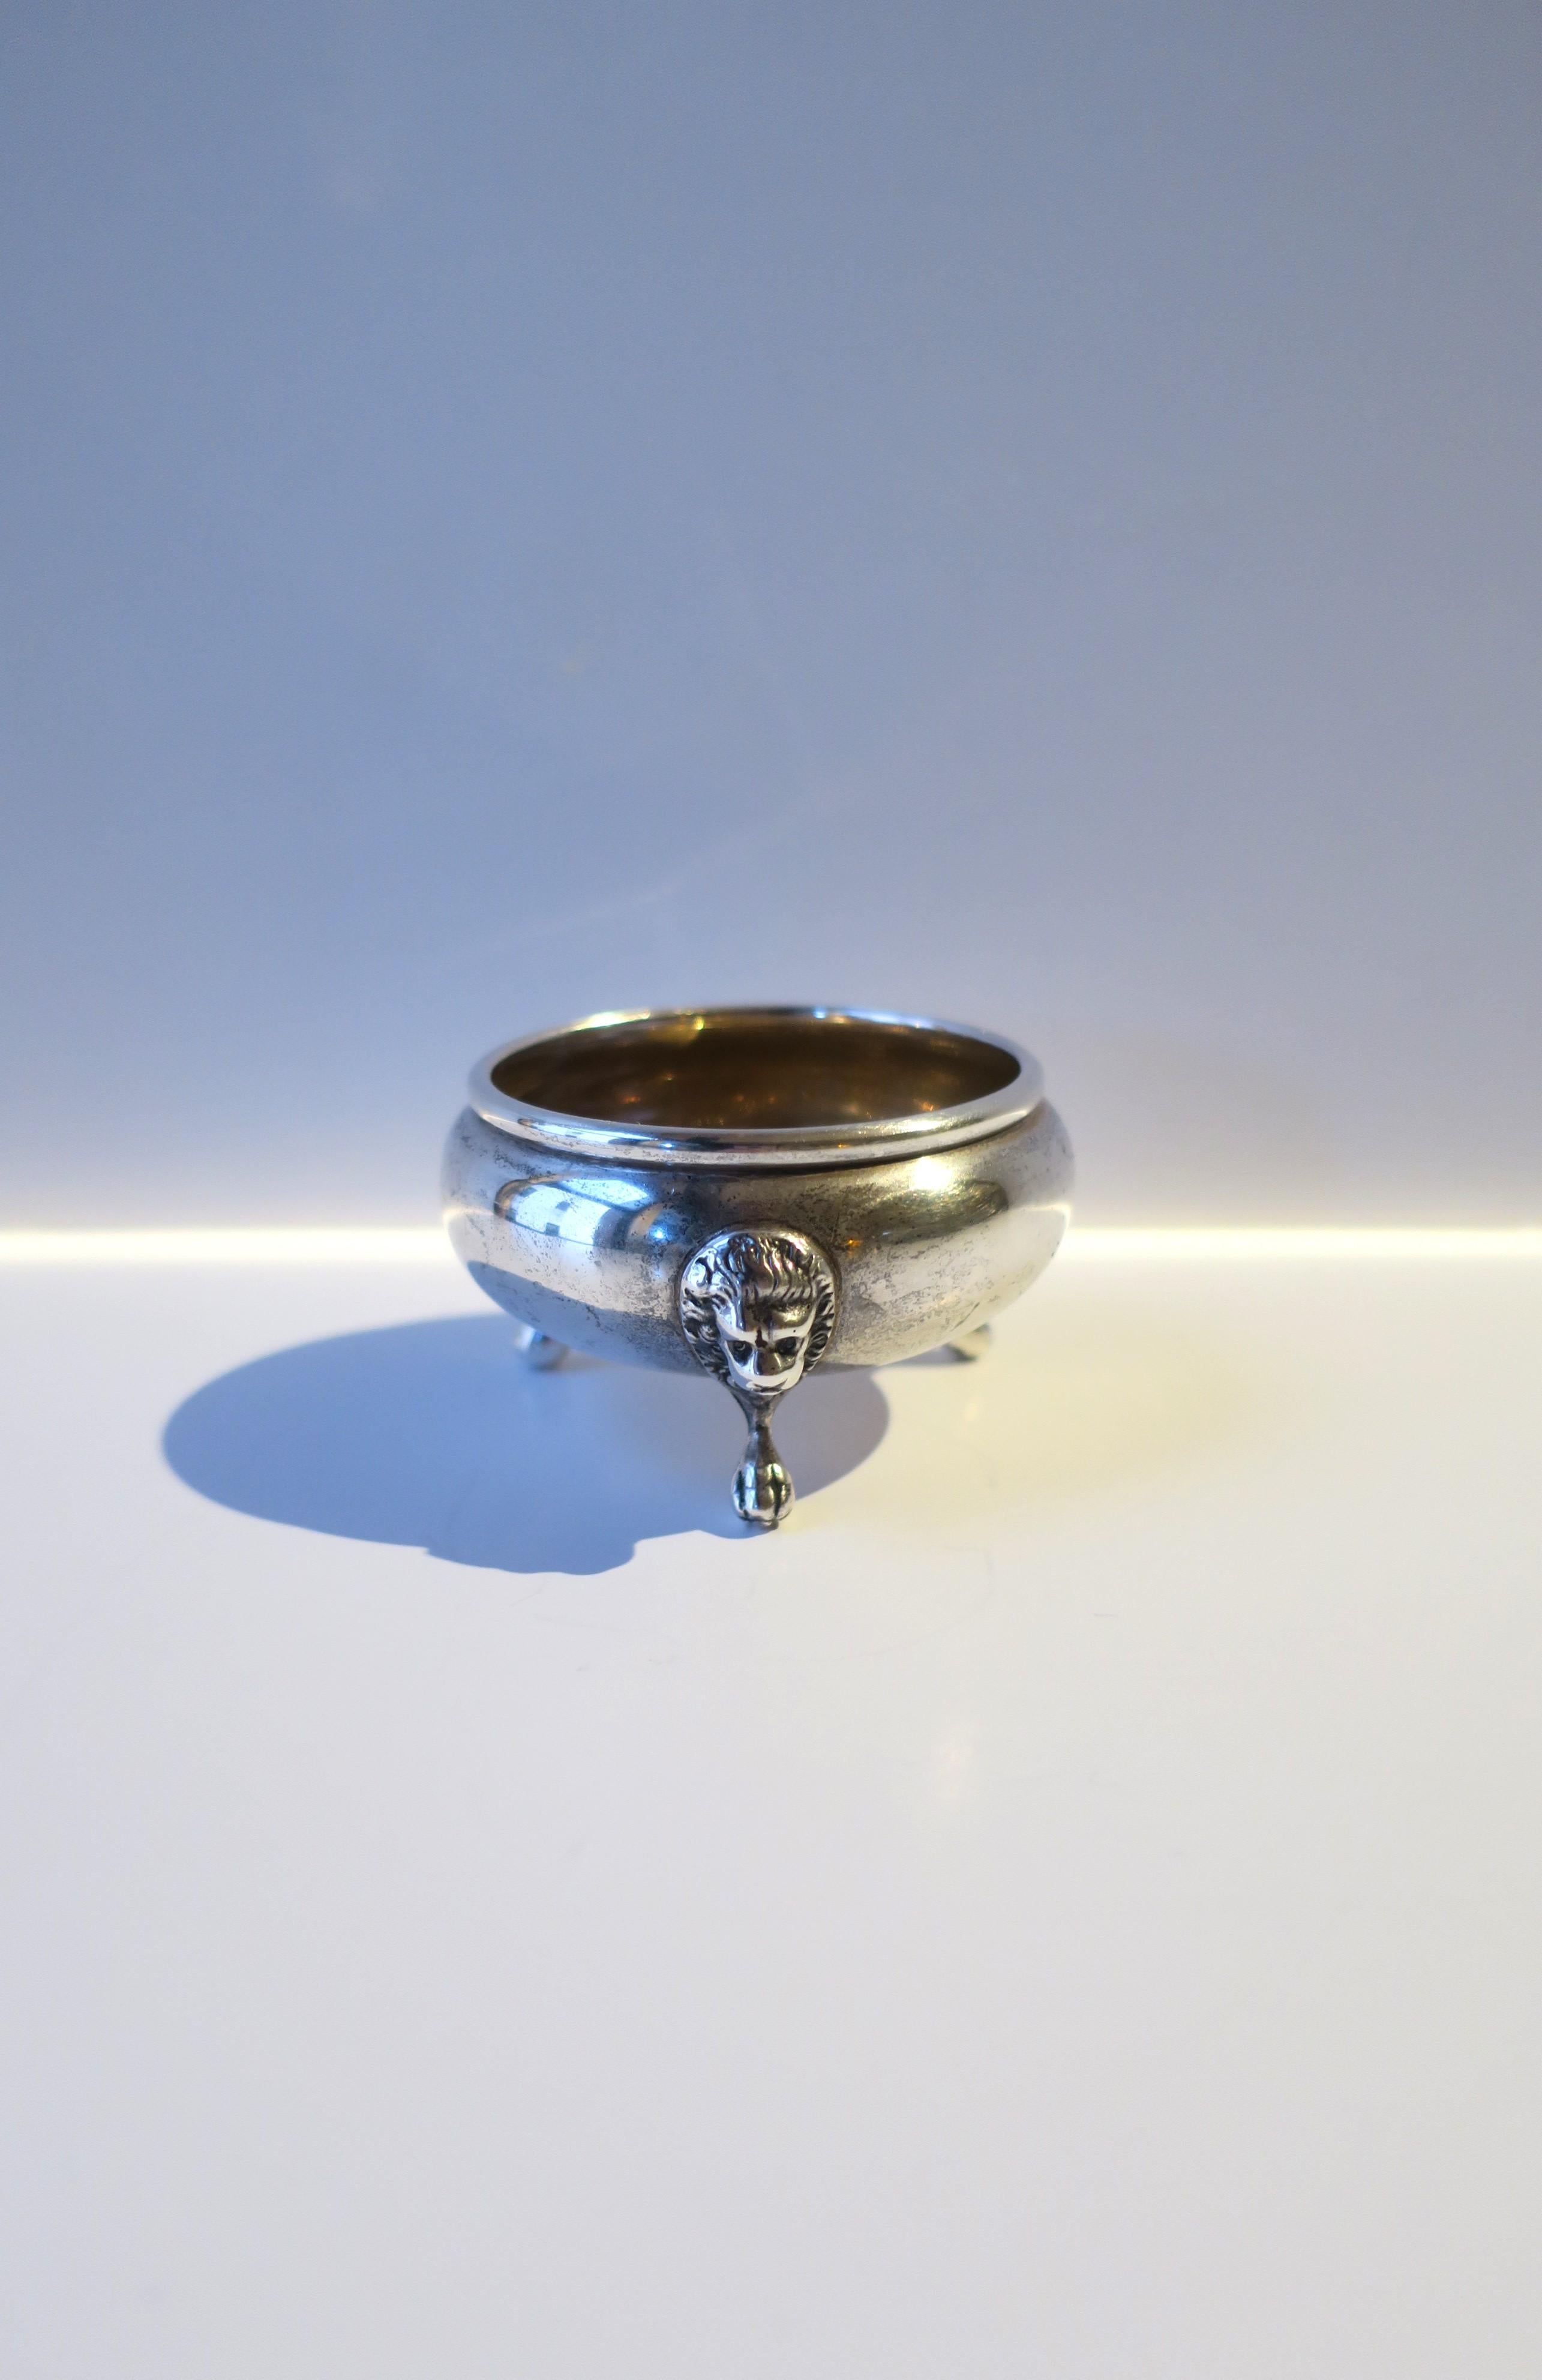 A sterling silver salt cellar with Lion head and paw feet detail, in the Empire style, circa early-20th century. Piece is a salt or pepper cellar vessel. A great piece for a dining table. Alternatively, please can be used to hold small items on a